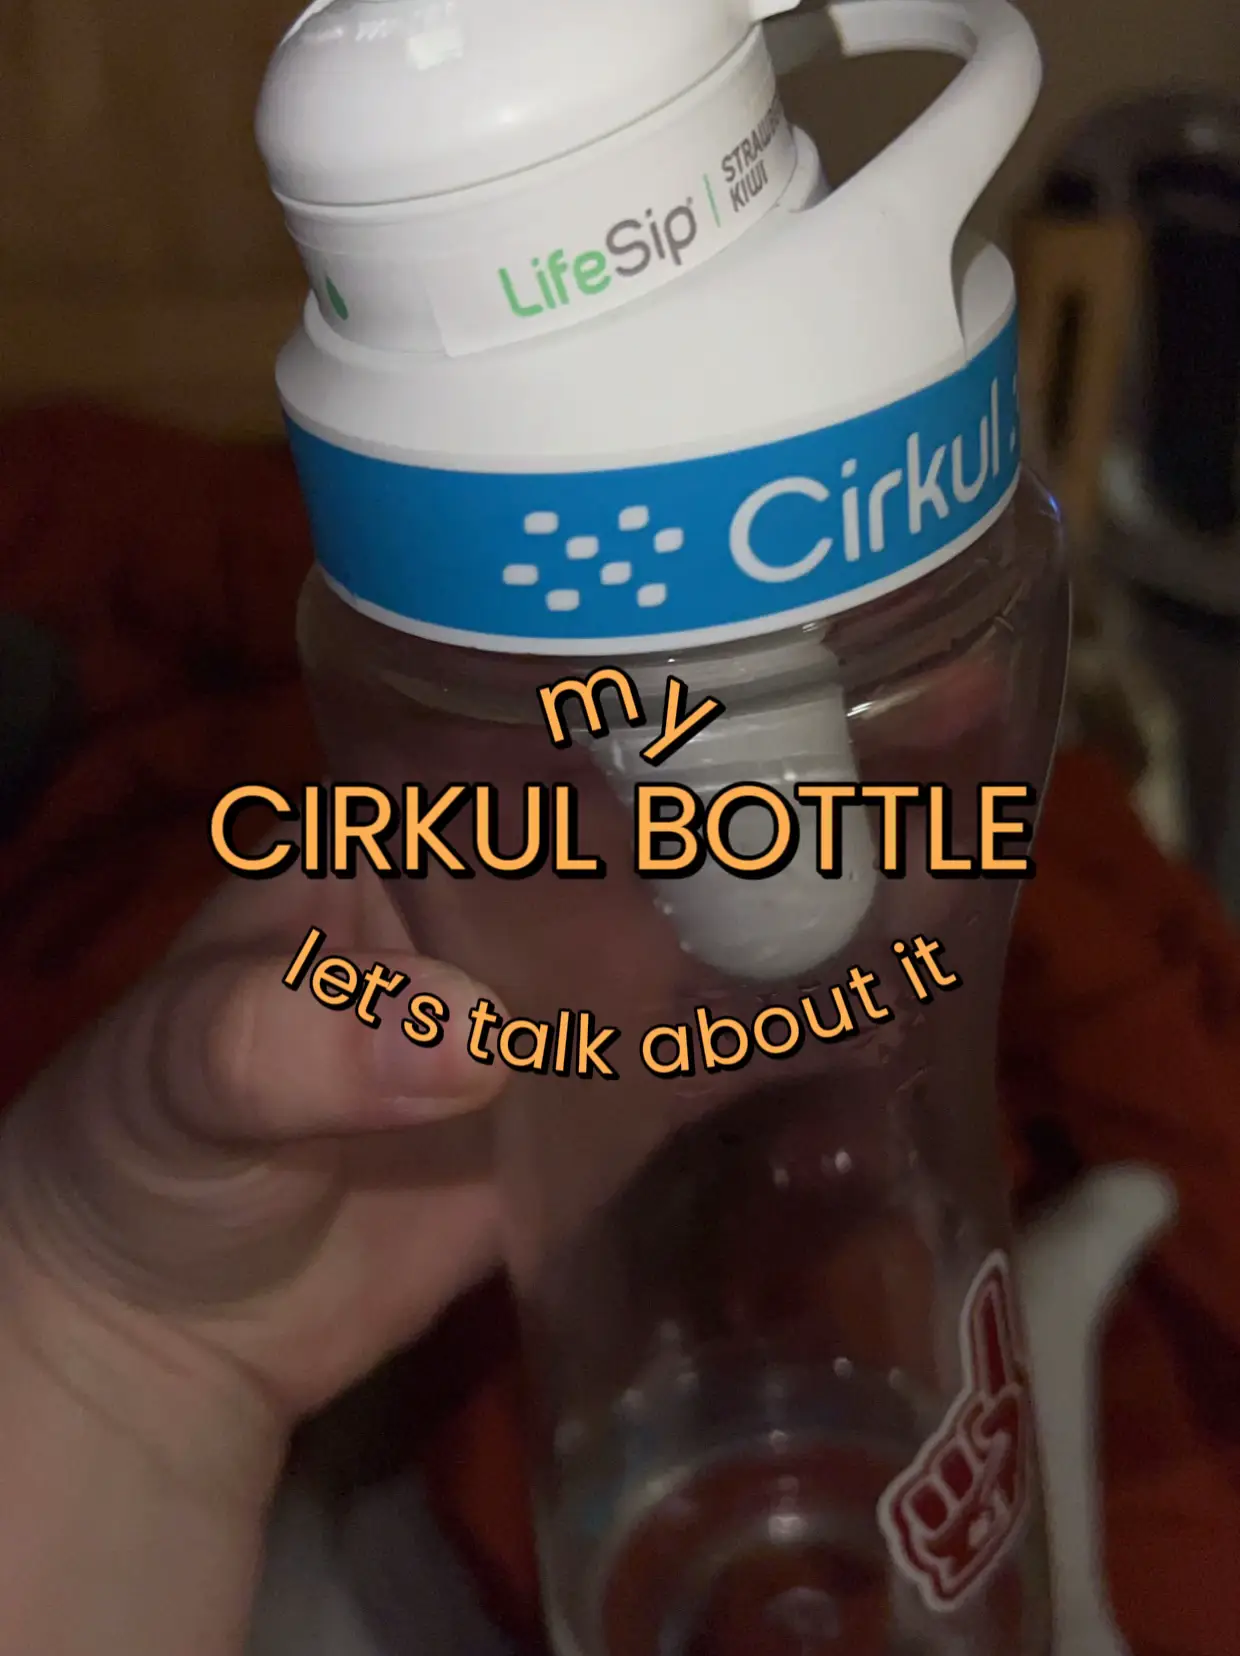 The Cirkul Water Bottle: Your Ultimate Hydration Companion